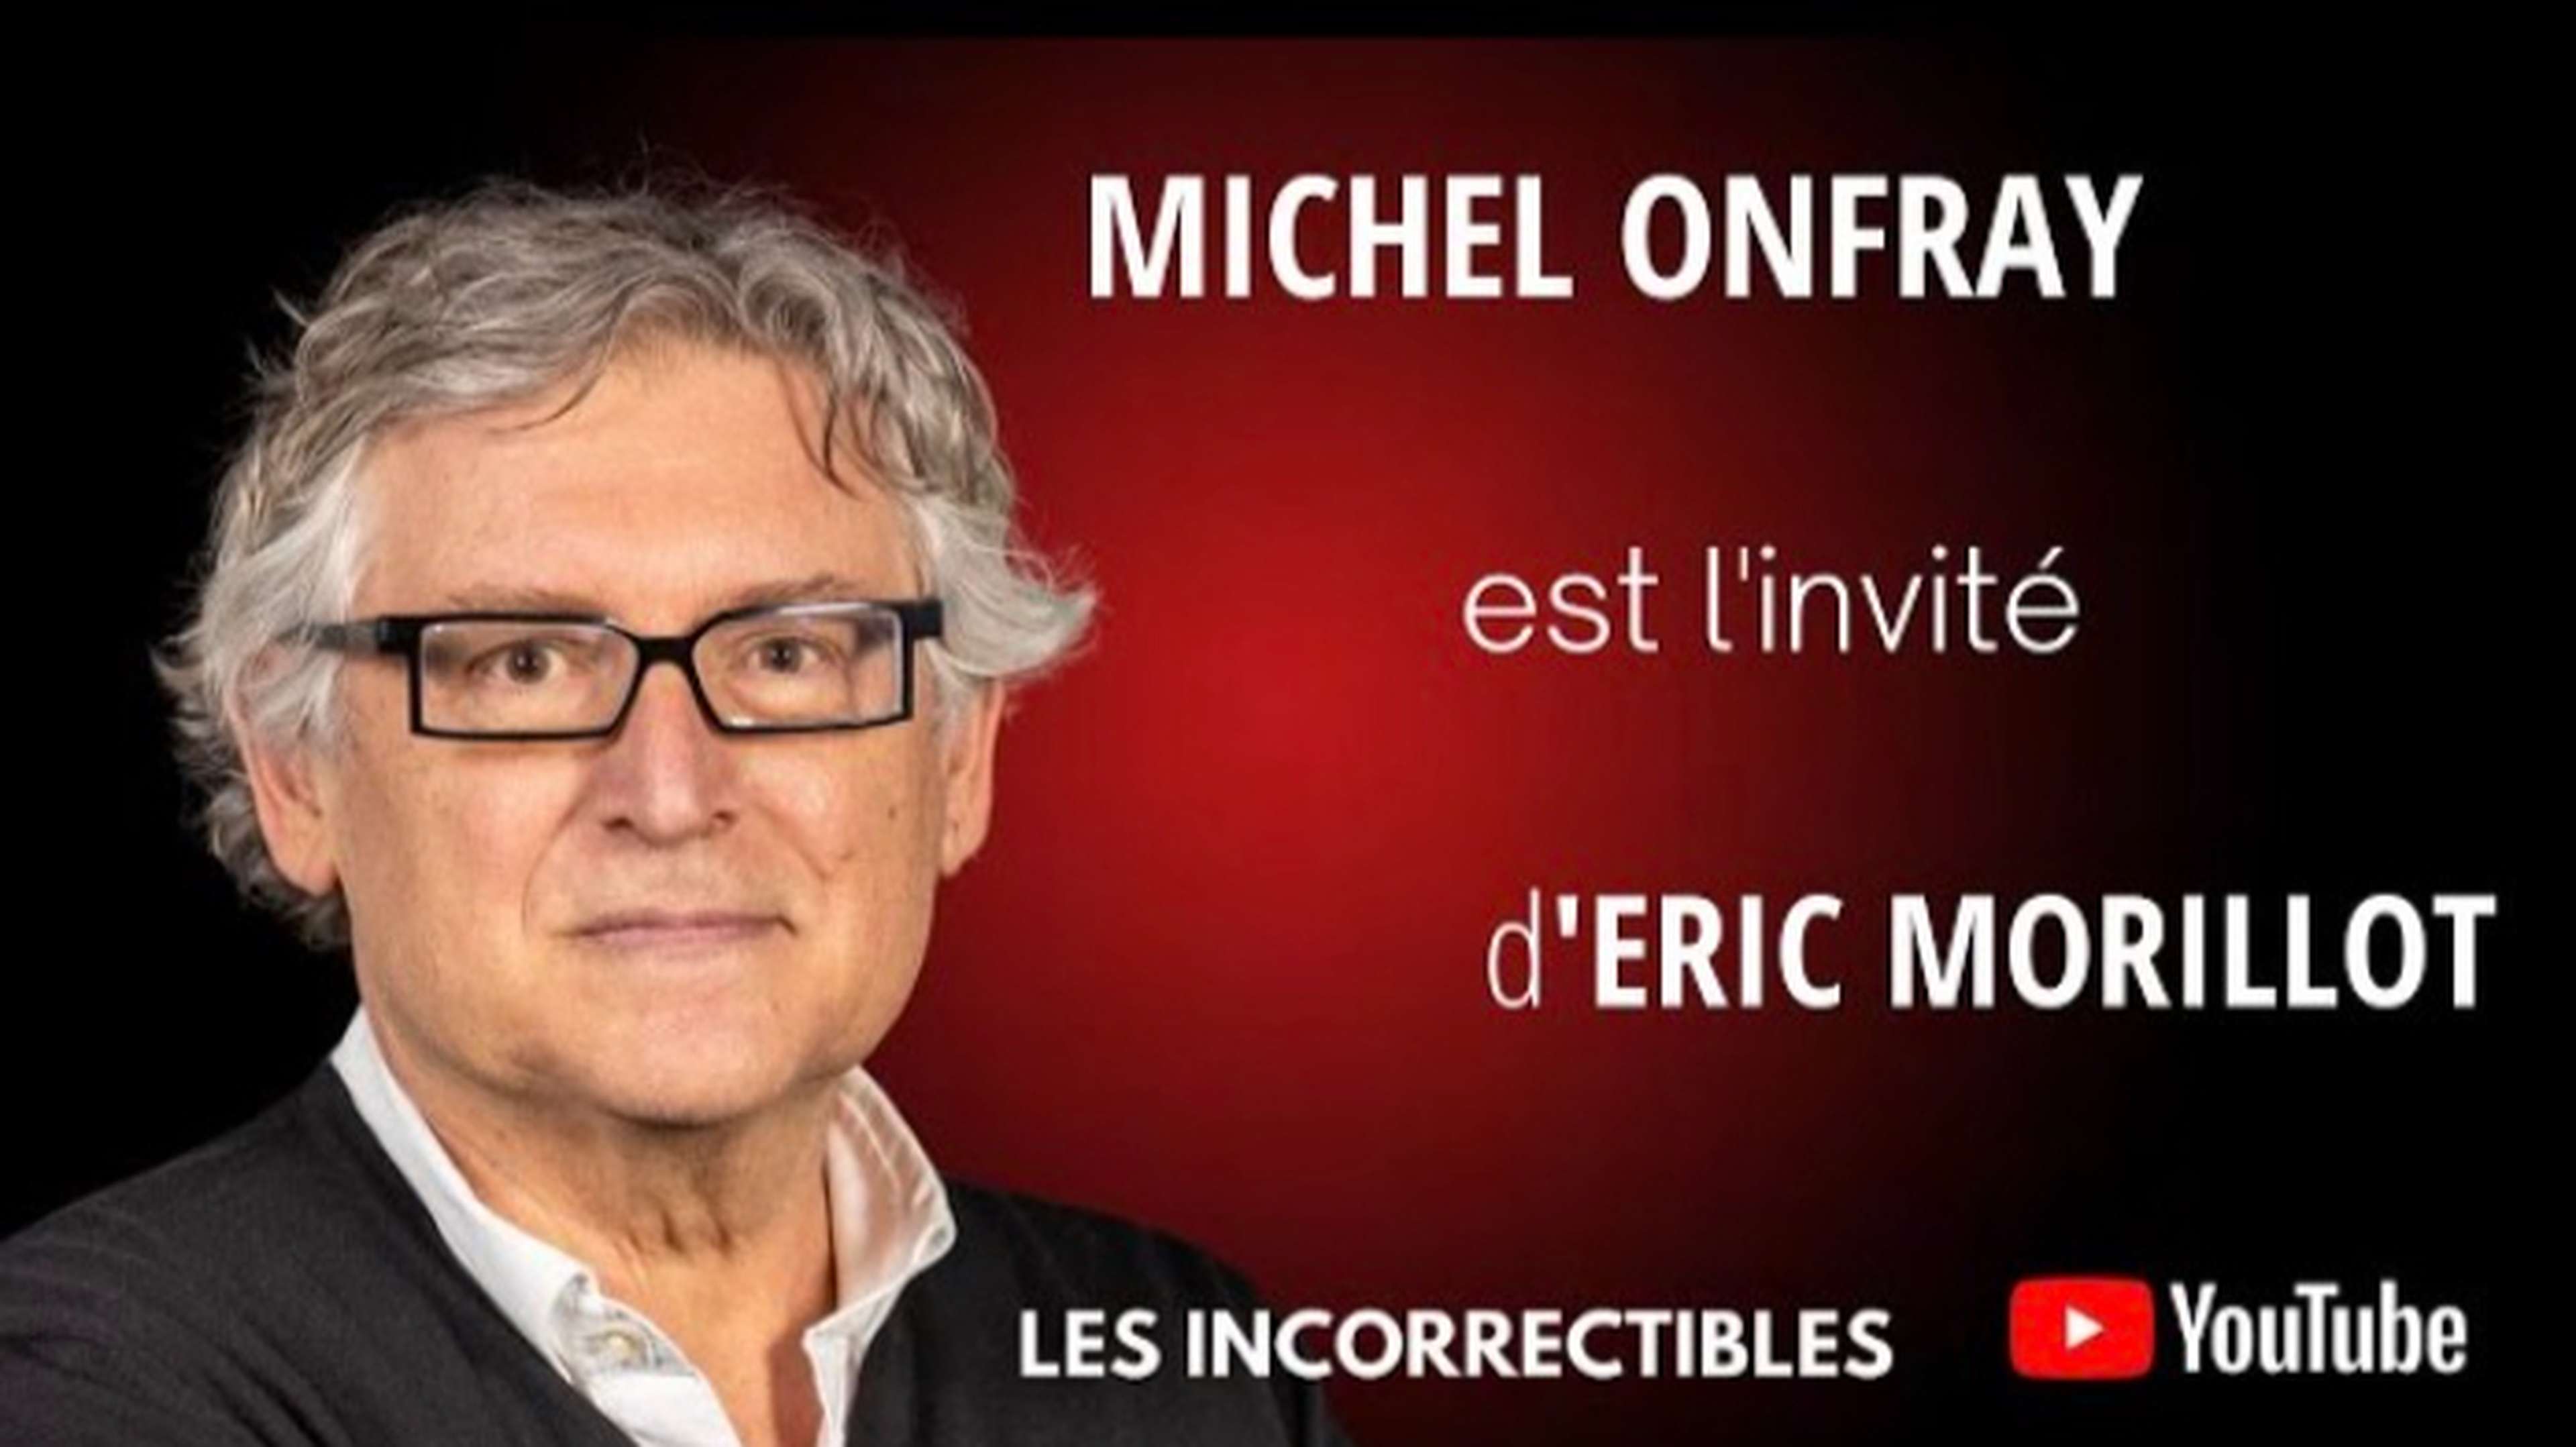 MICHEL-ONFRAY-MORILLOT